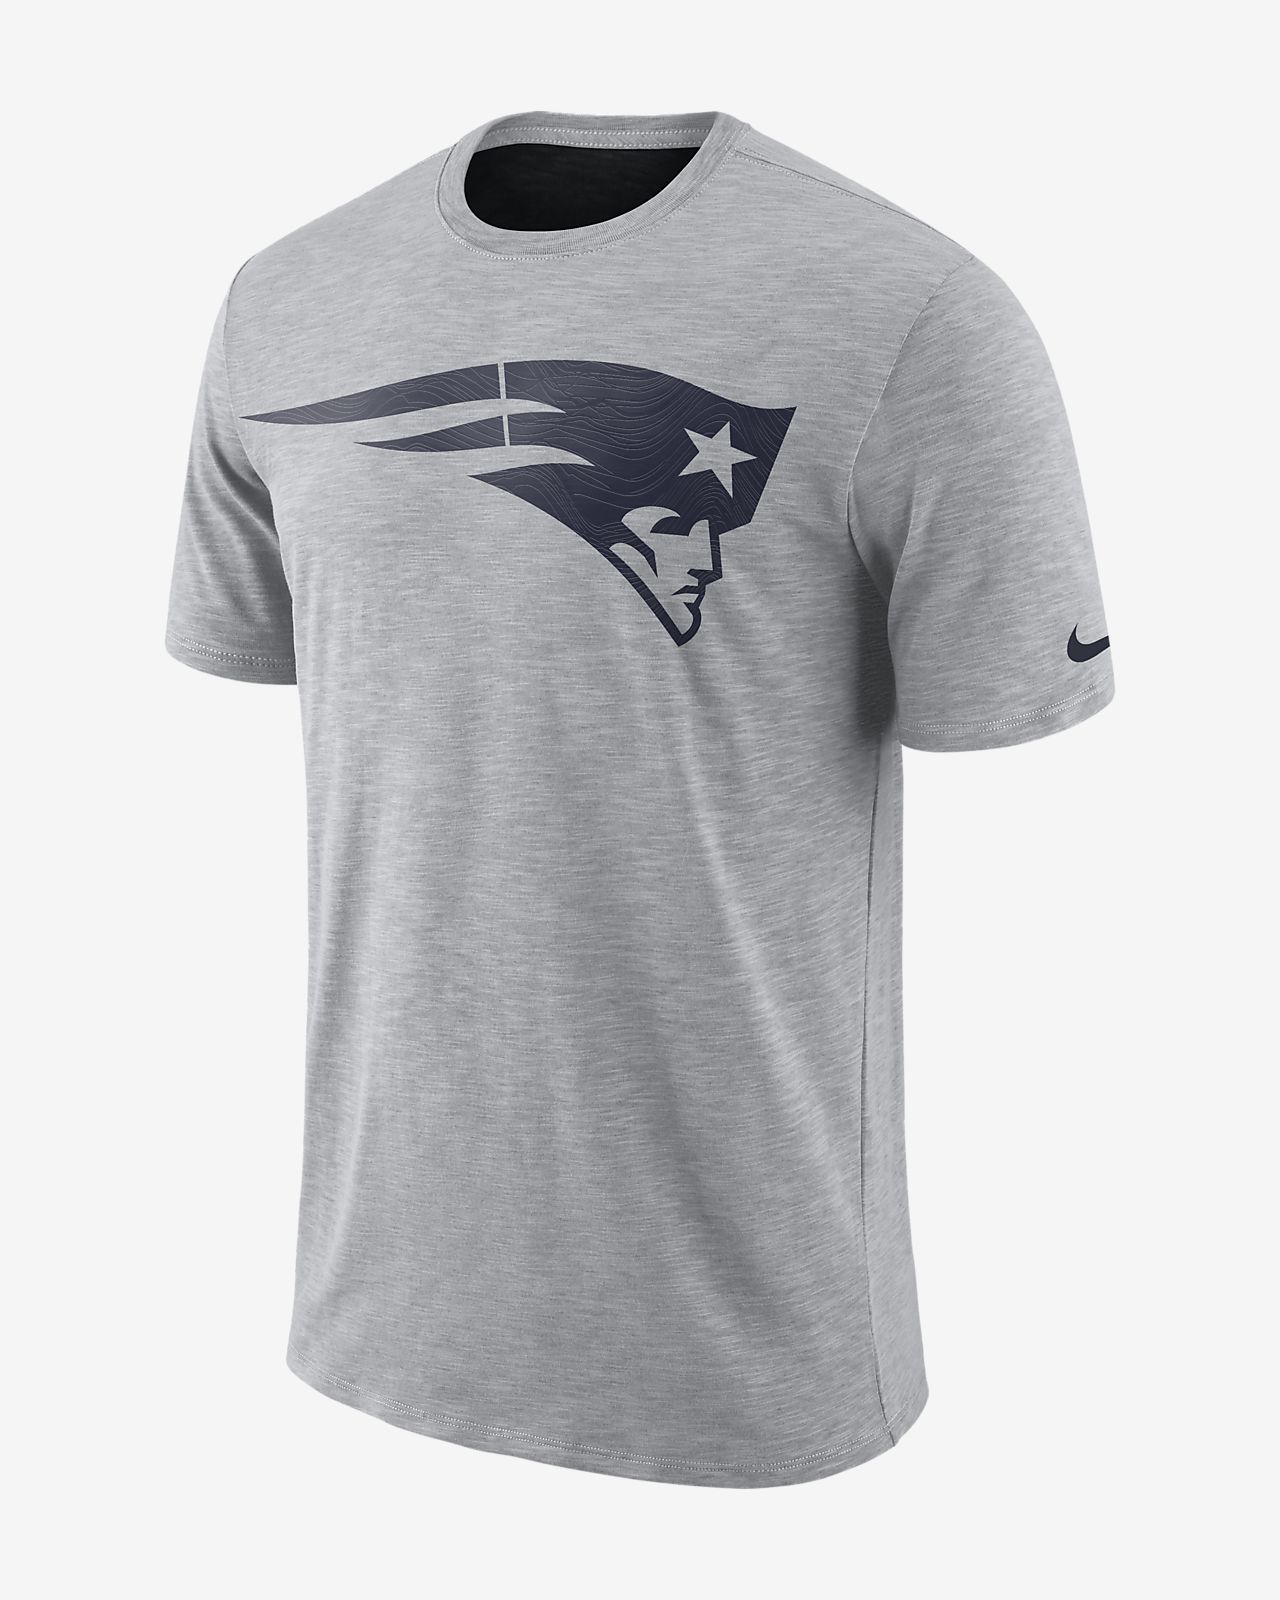 nike dri fit nfl factory outlet 11fa7 72a2f